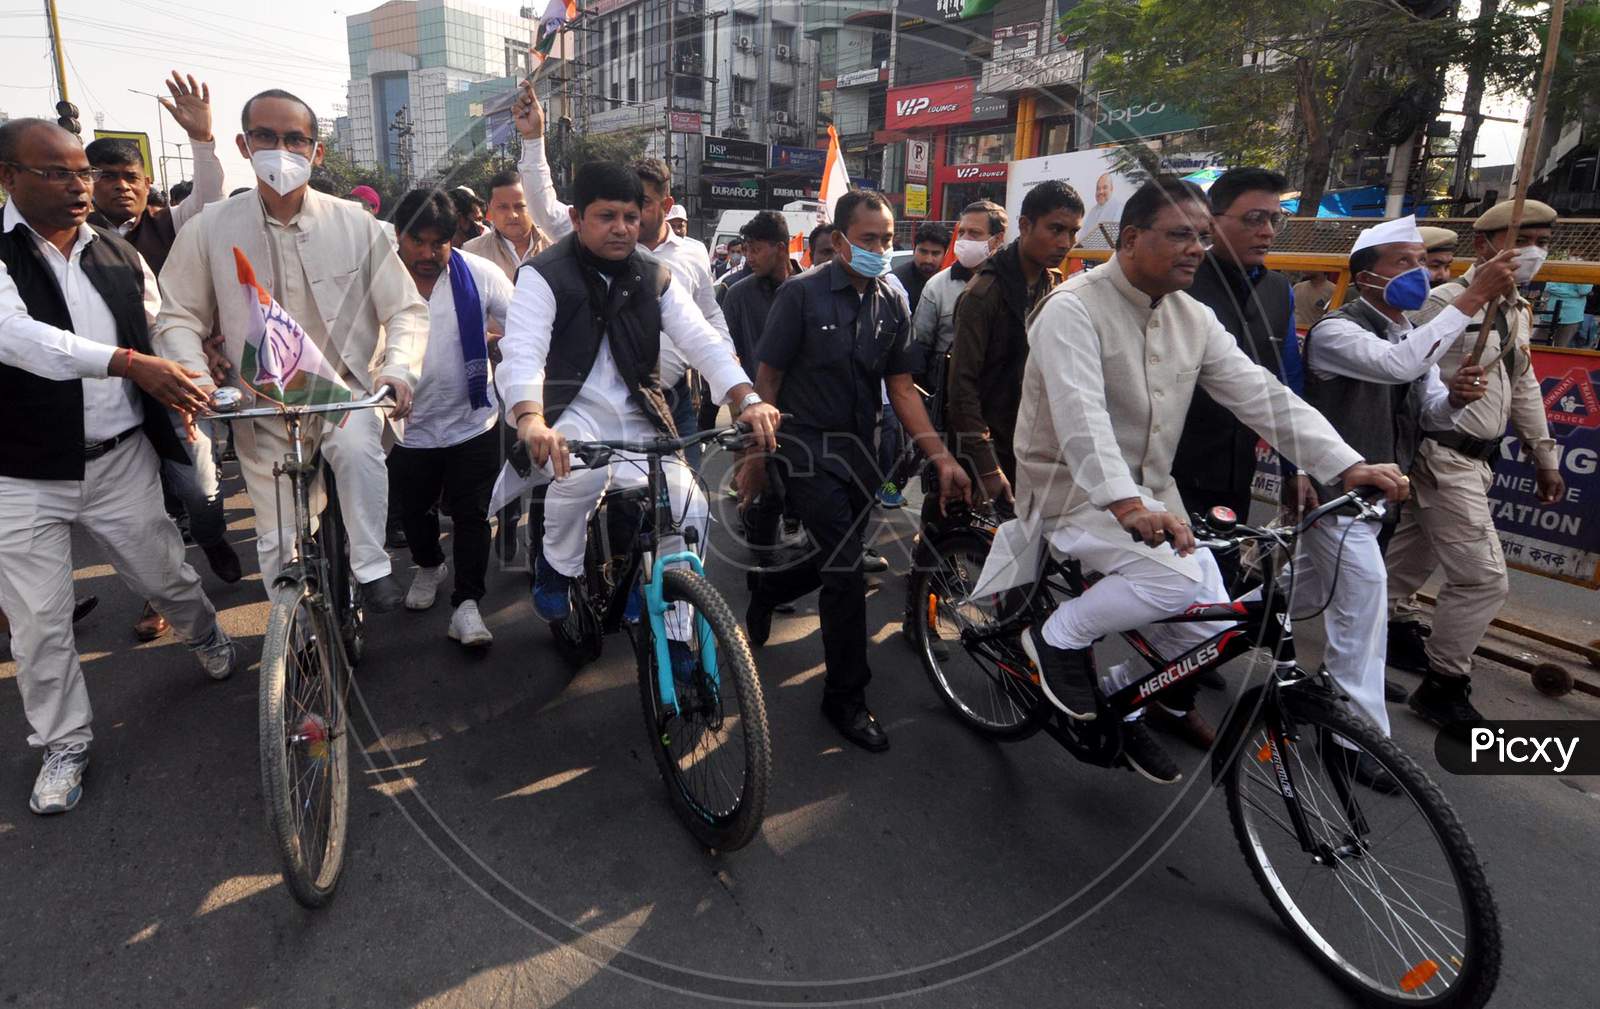 MP Gaurav Gogoi, Assam Pradesh Congress Chief Ripun Bora, and senior party leaders take part in a protest rally against fuel price hike, in Guwahati, Monday, Dec. 28, 2020.